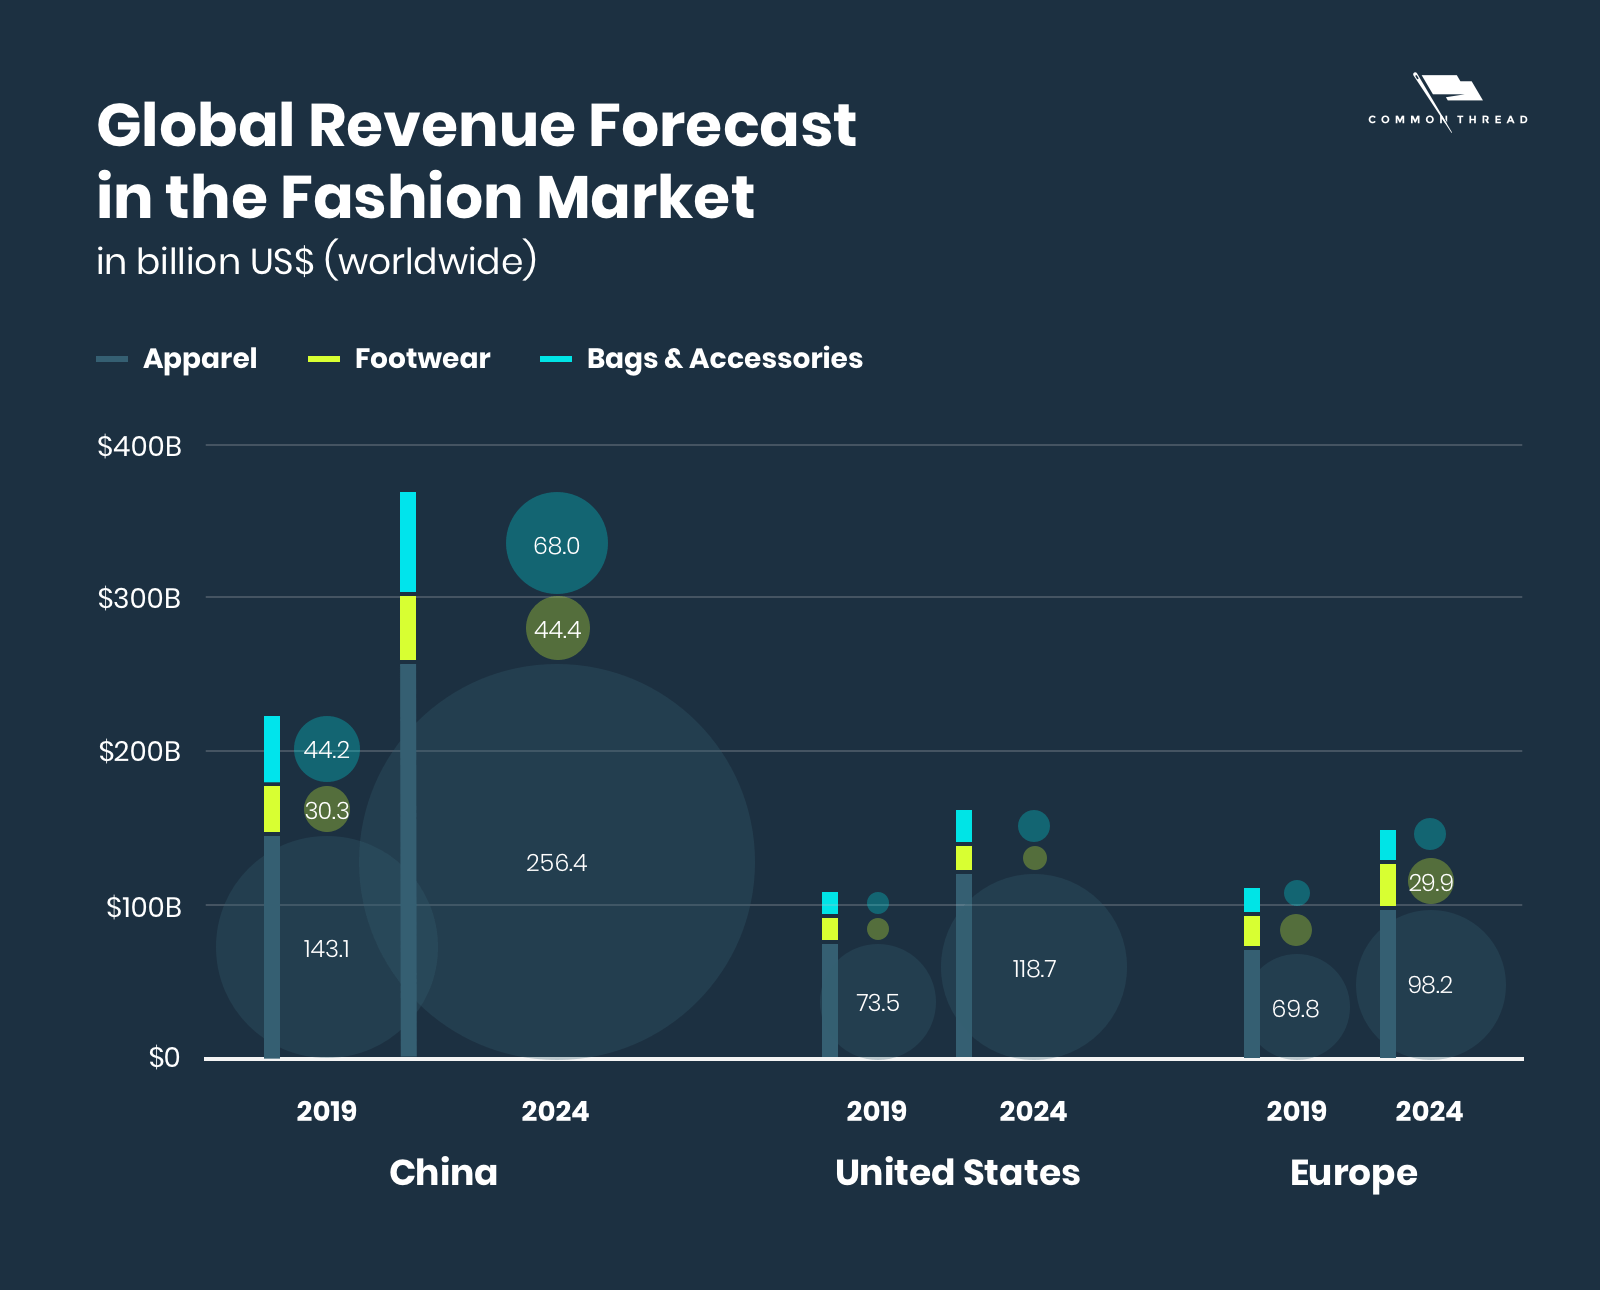 Global revenue forecast in the fashion market